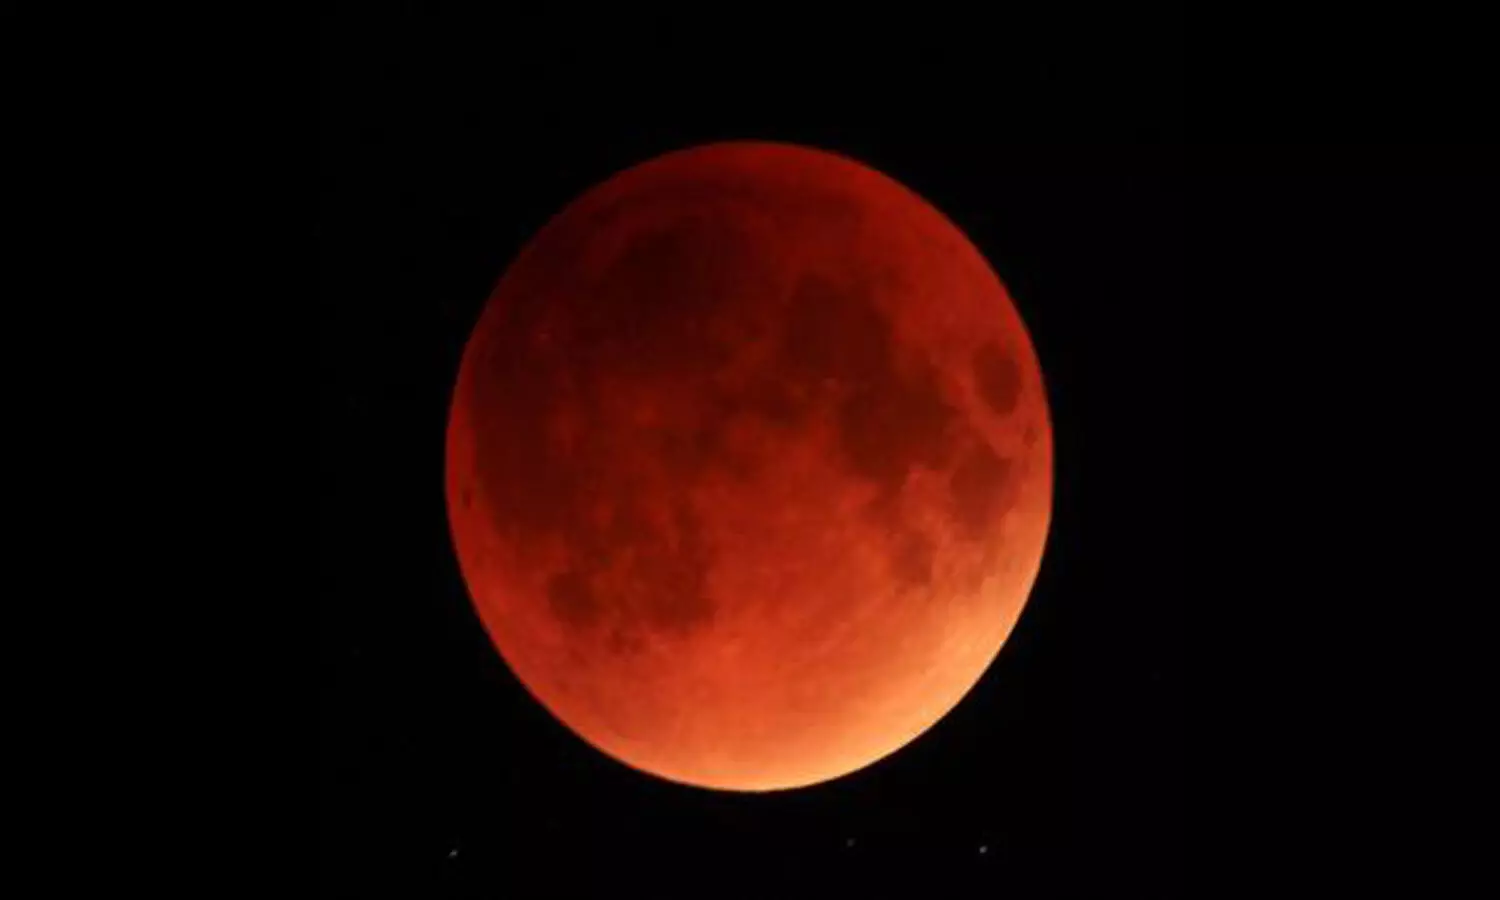 Lunar Eclipse 2021: Blood Supermoon will be most spectacular on May 26; check details here